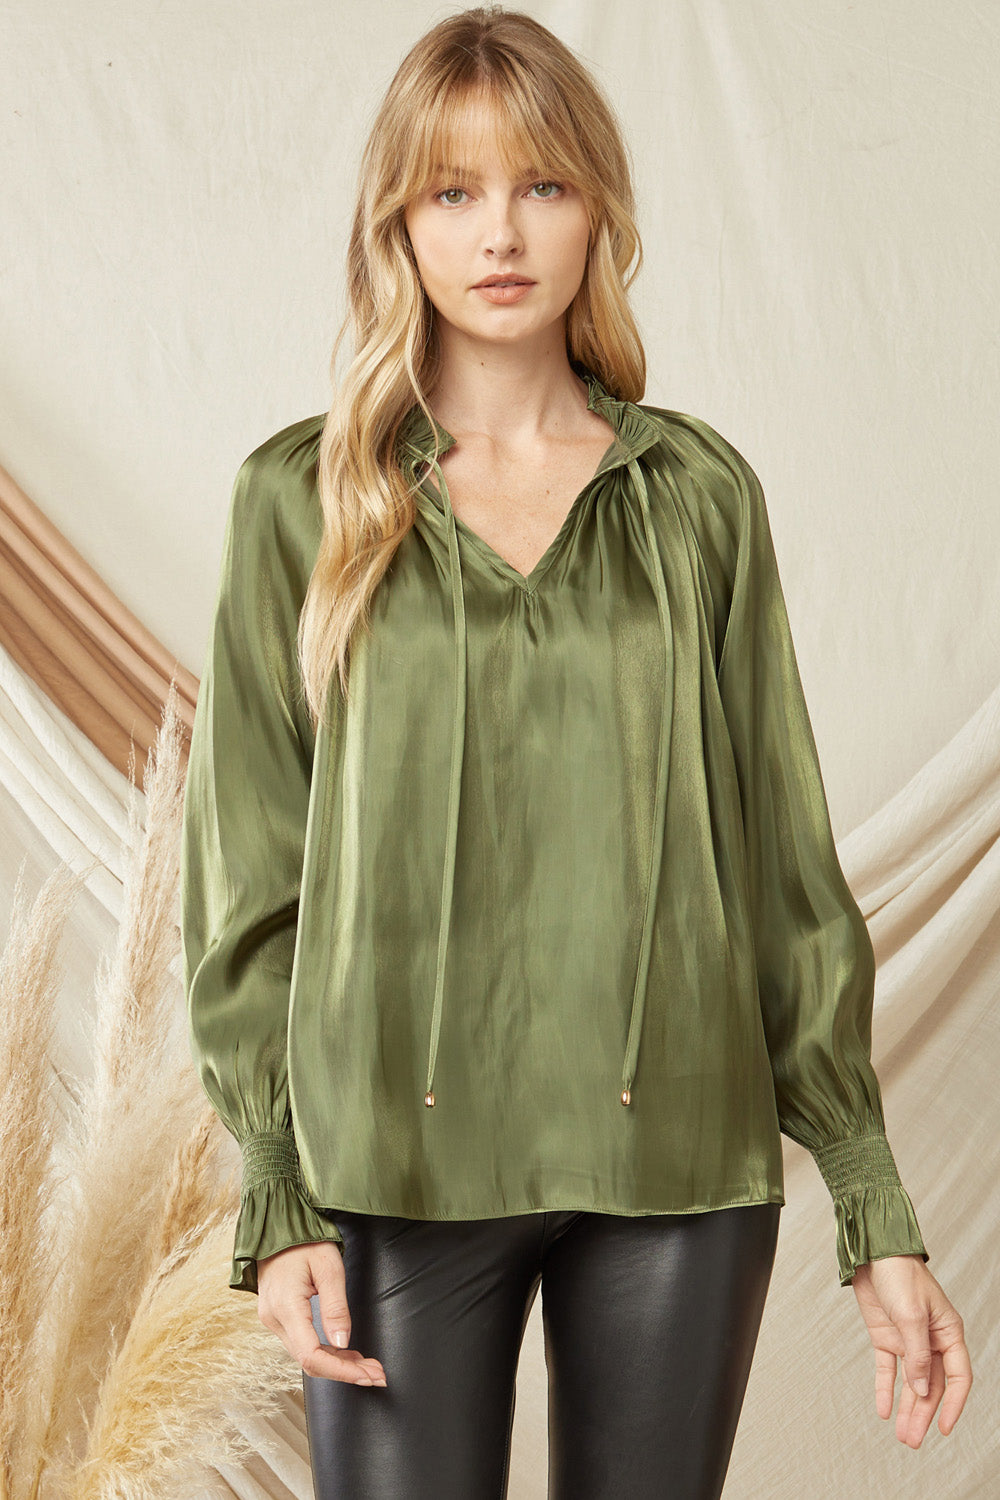 Ready For The Party Top in Olive-MEDIUM